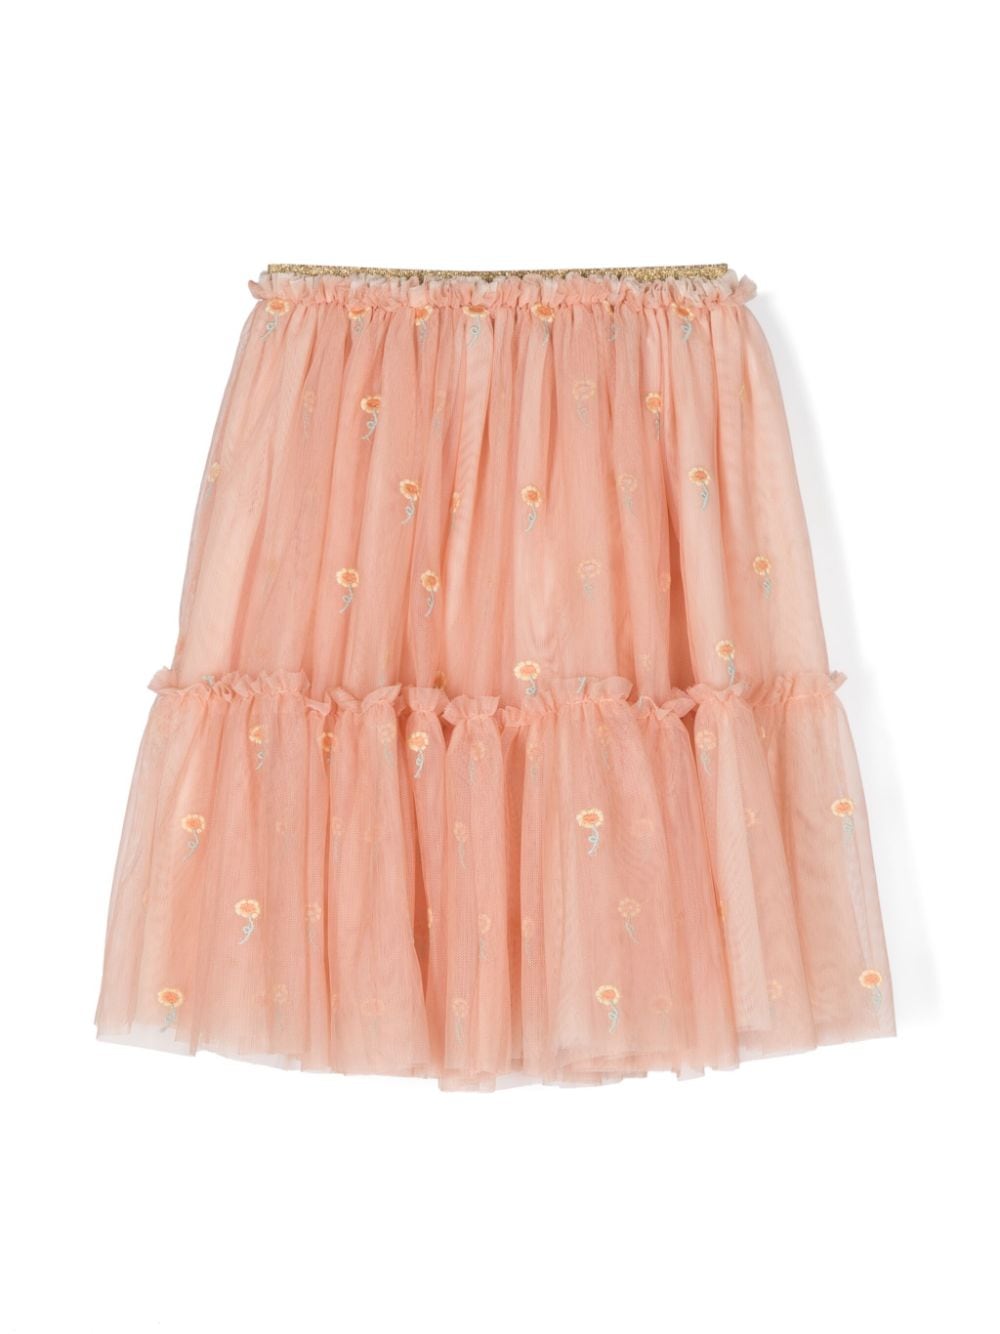 Stella McCartney Kids floral-embroidery tulle skirt - Orange von Stella McCartney Kids